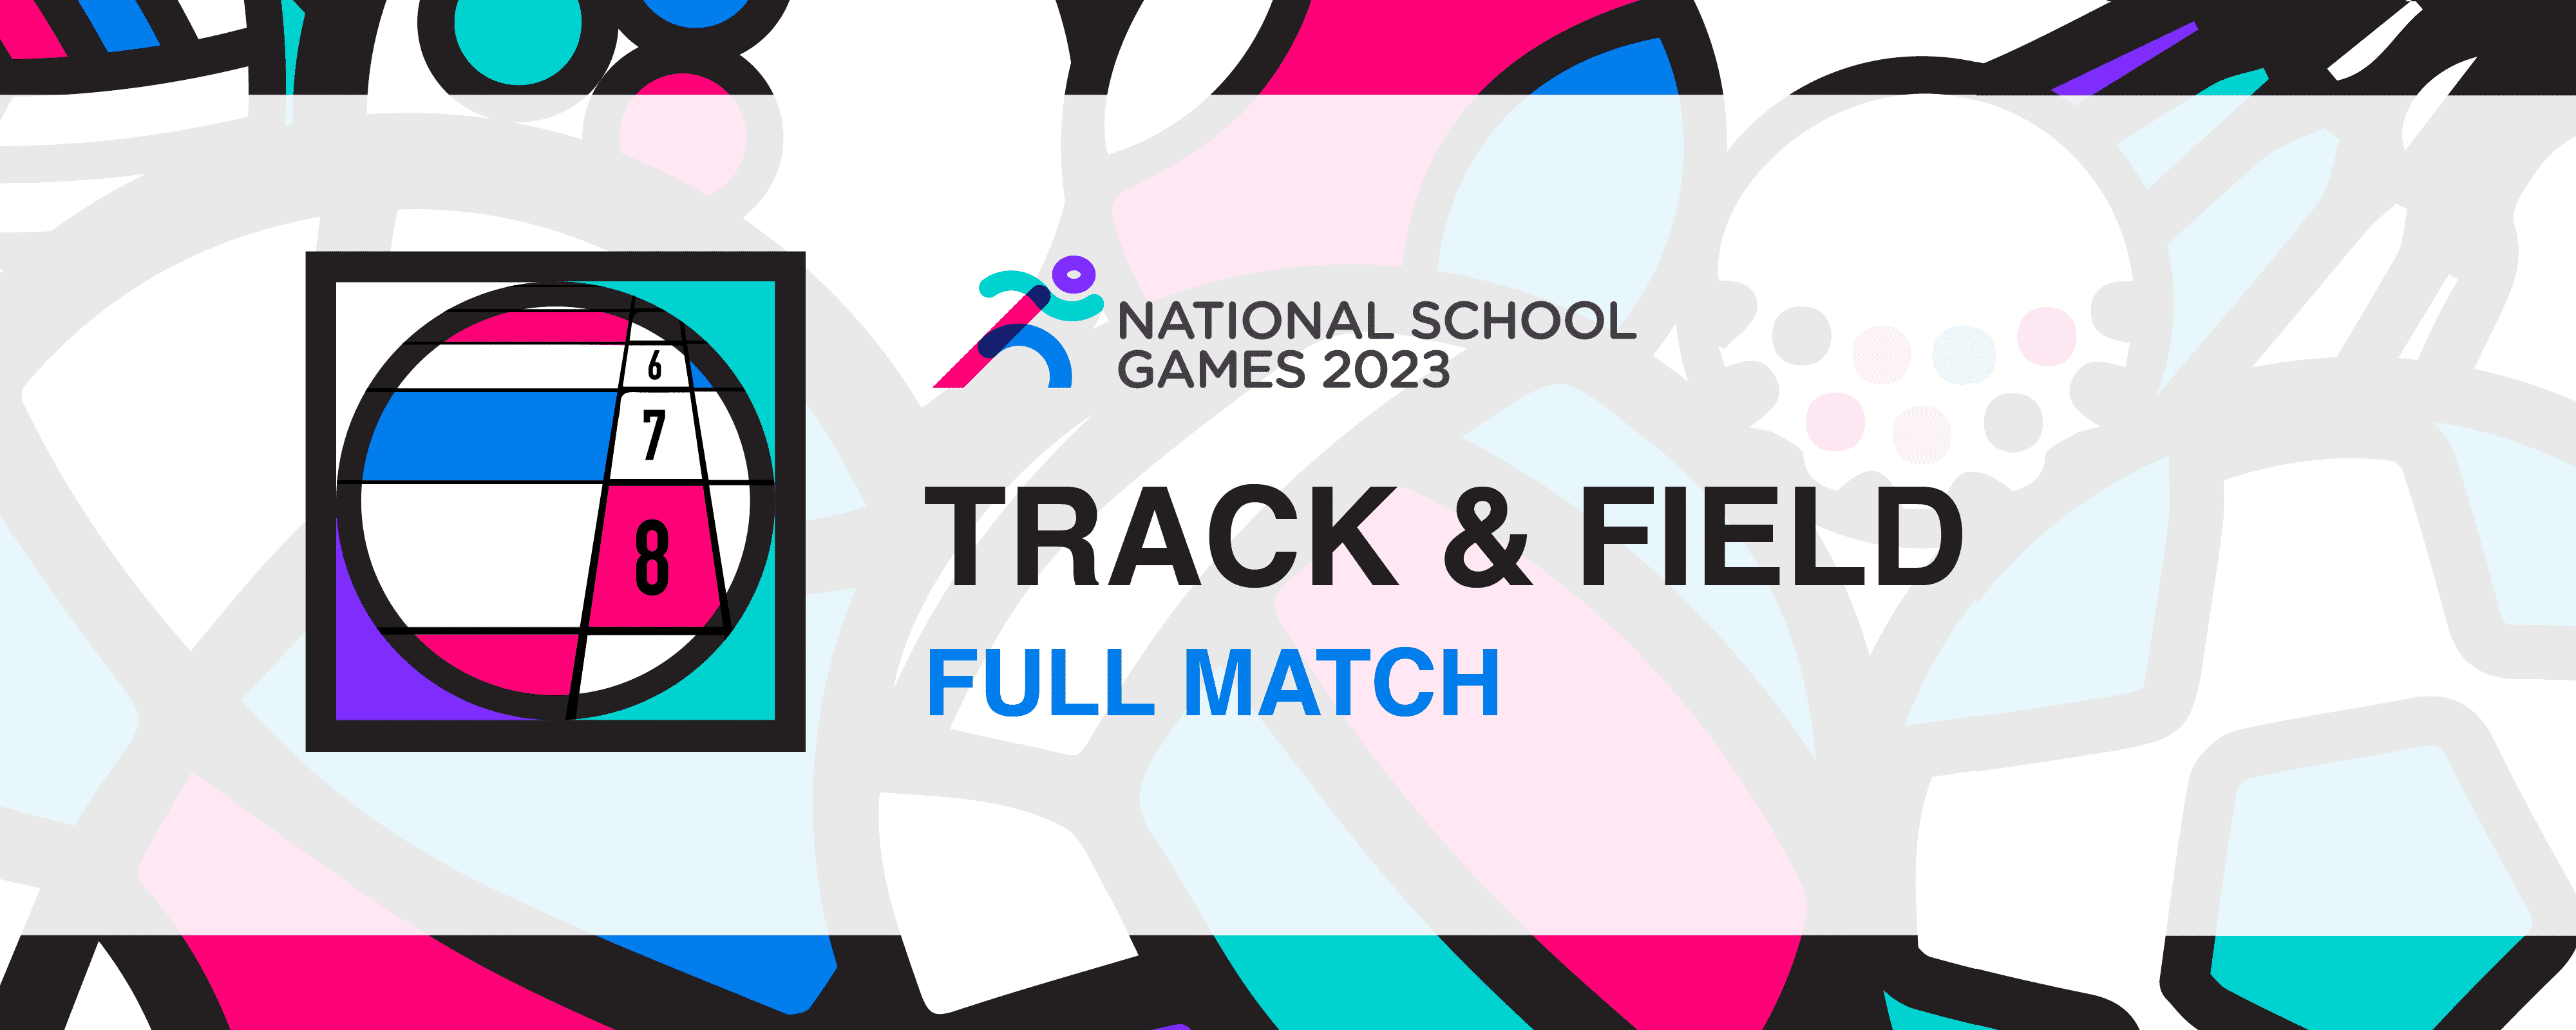 National School Games 2023 | Track & Field Championships | Finals